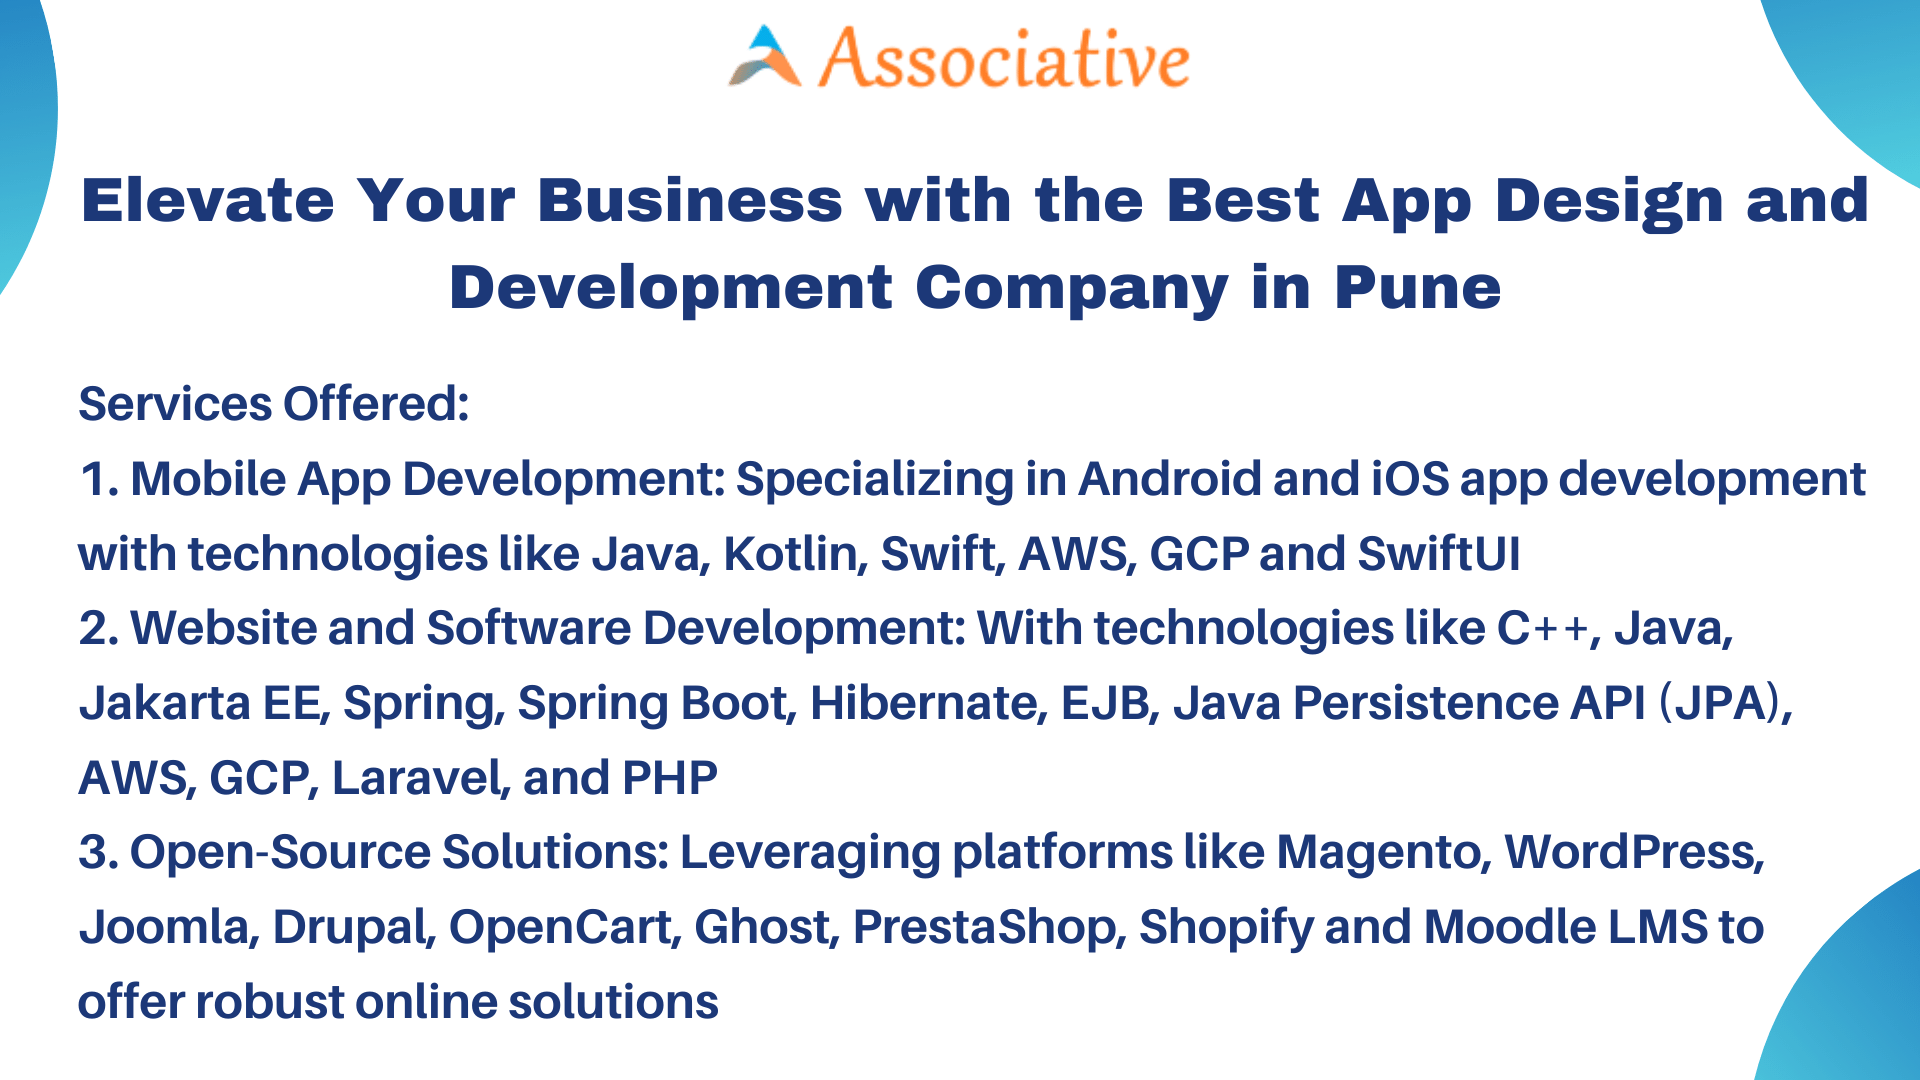 Elevate Your Business with the Best App Design and Development Company in Pune